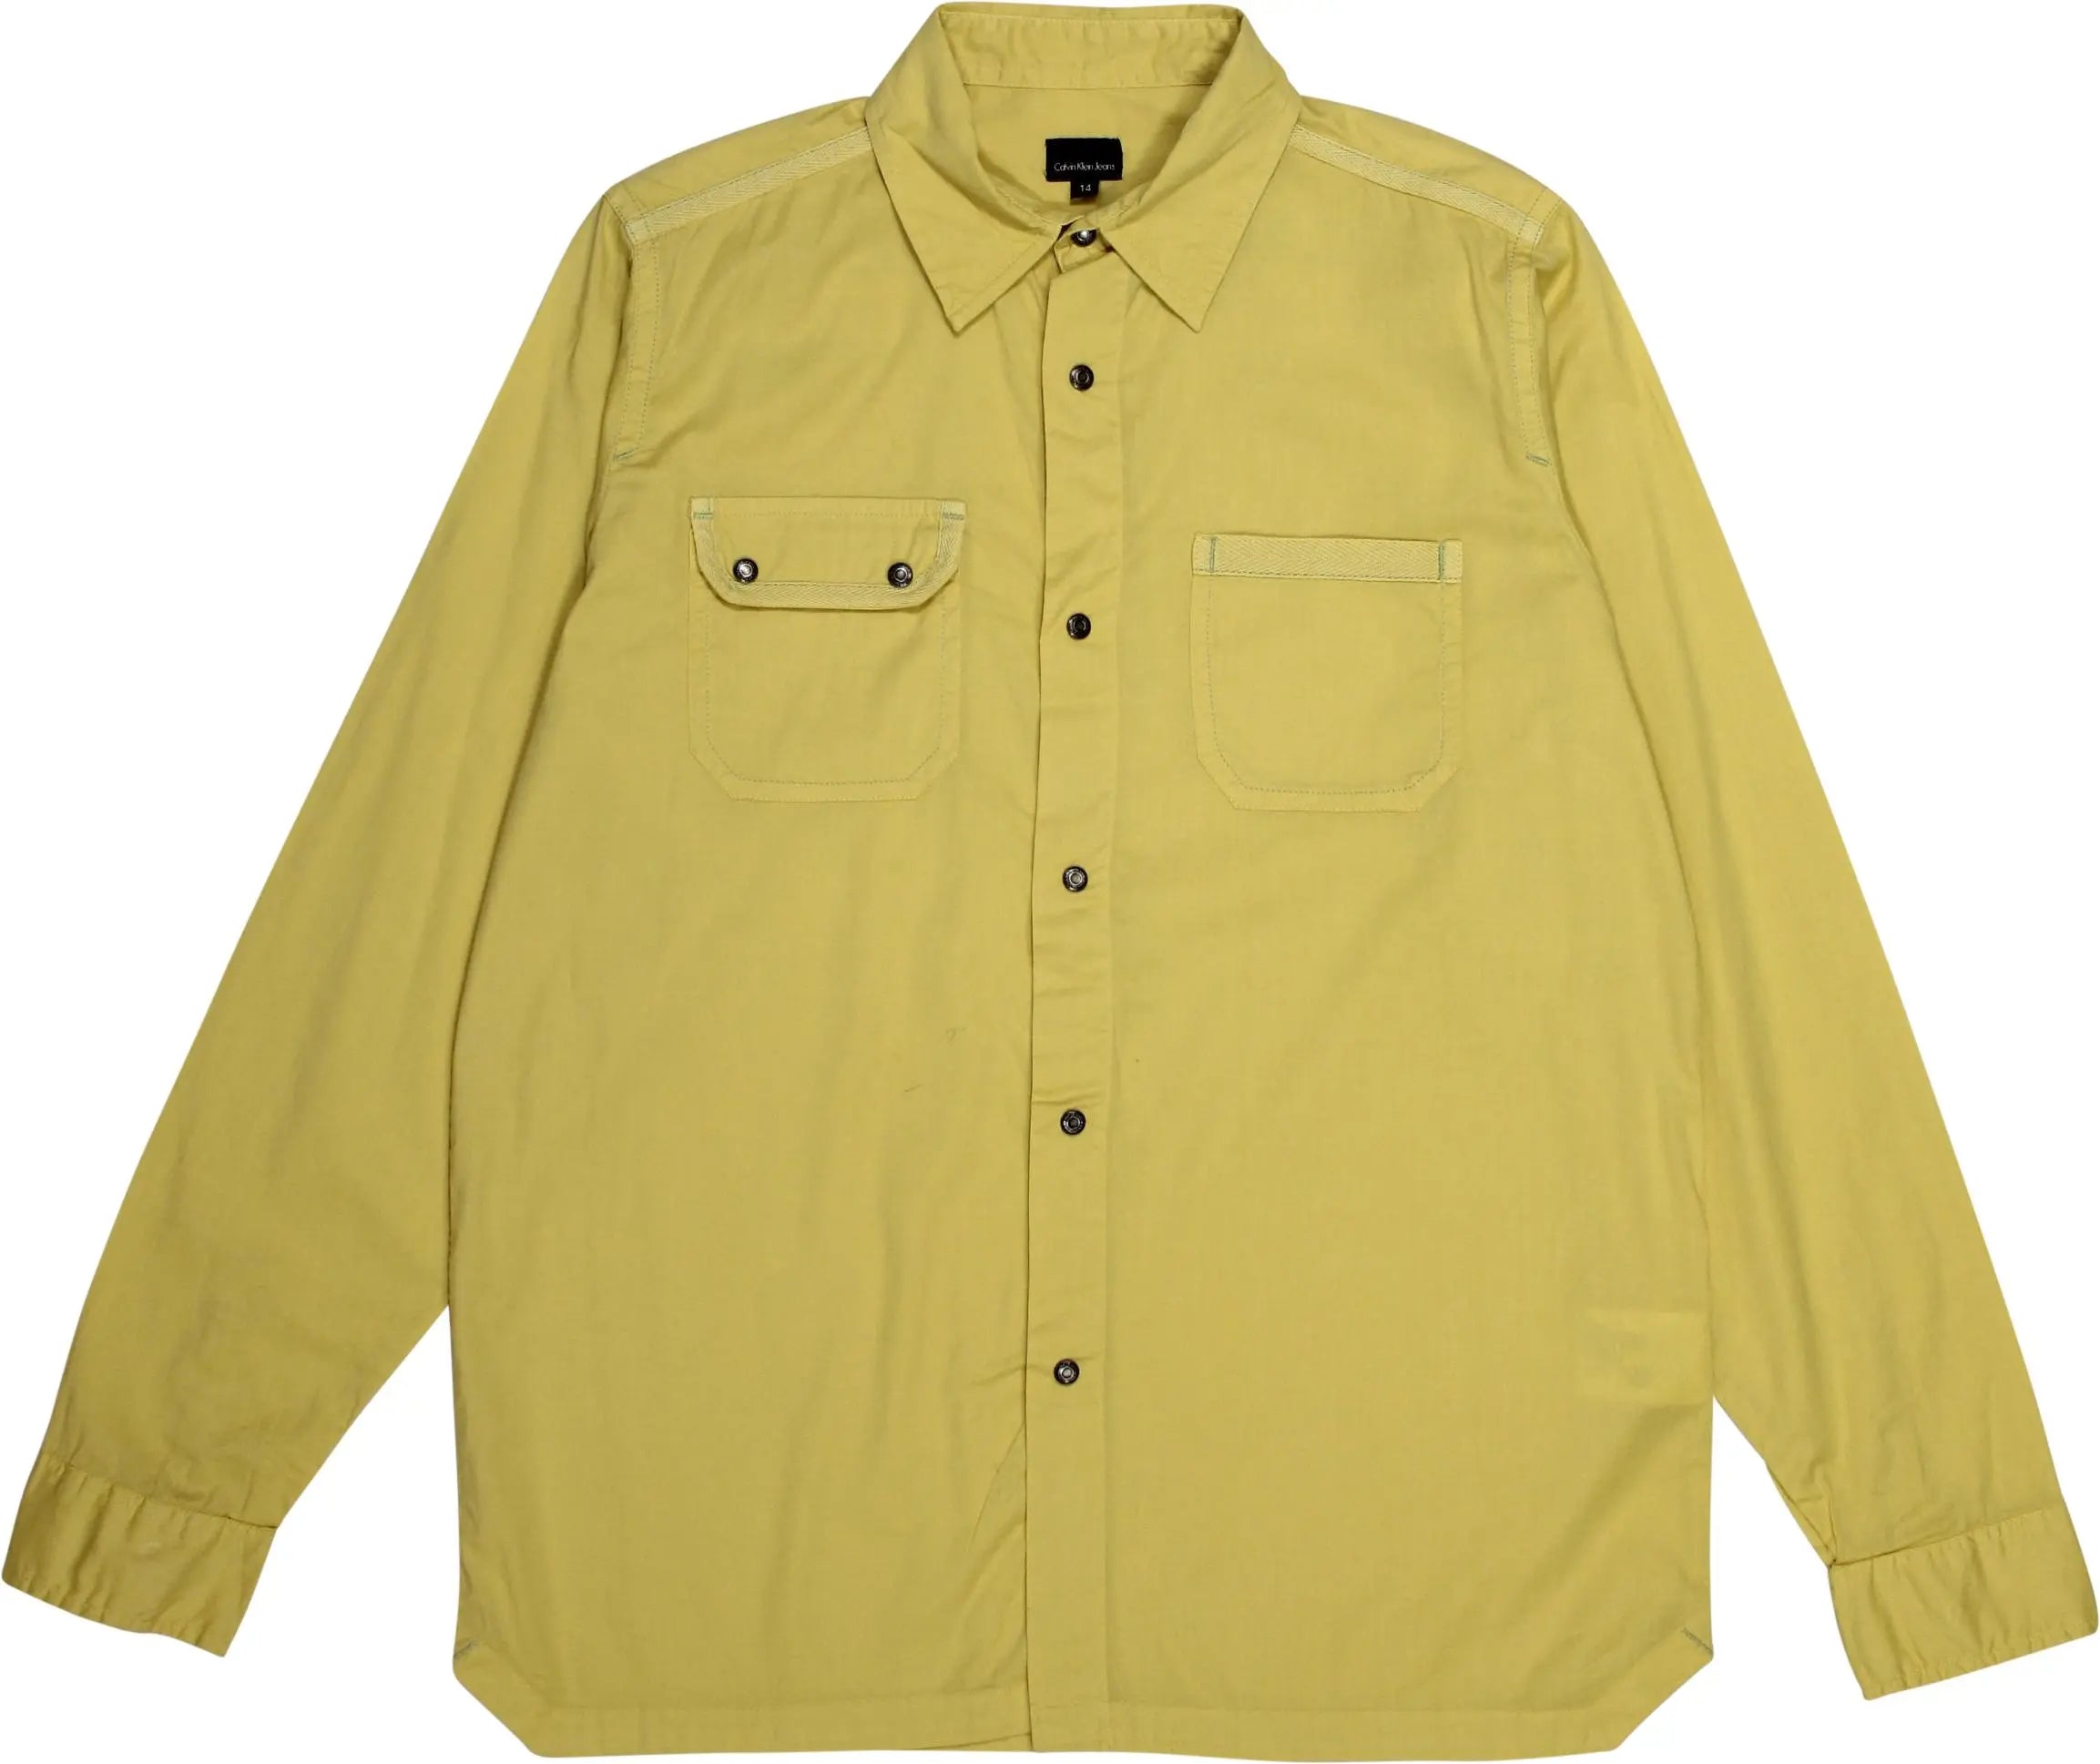 Calvin Klein Jeans - Yellow Long Sleeve Shirt by Calvin Klein Jeans- ThriftTale.com - Vintage and second handclothing